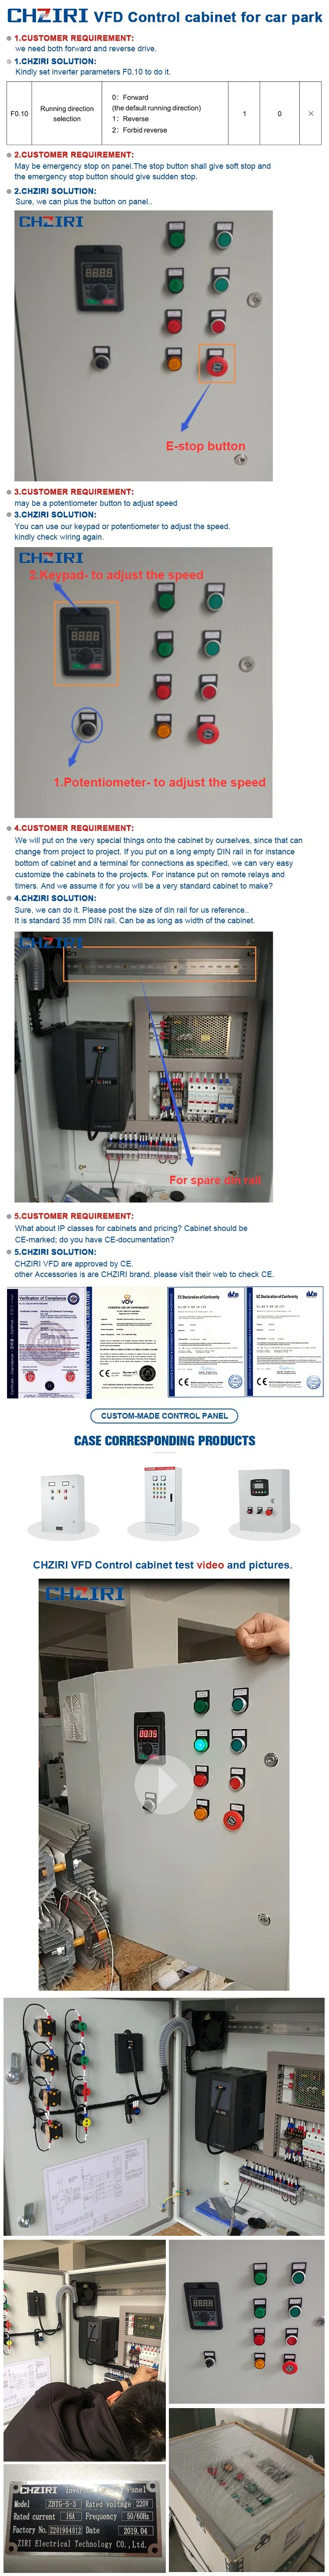 AC Frequency Conversion Control Cabinet for Power Industry